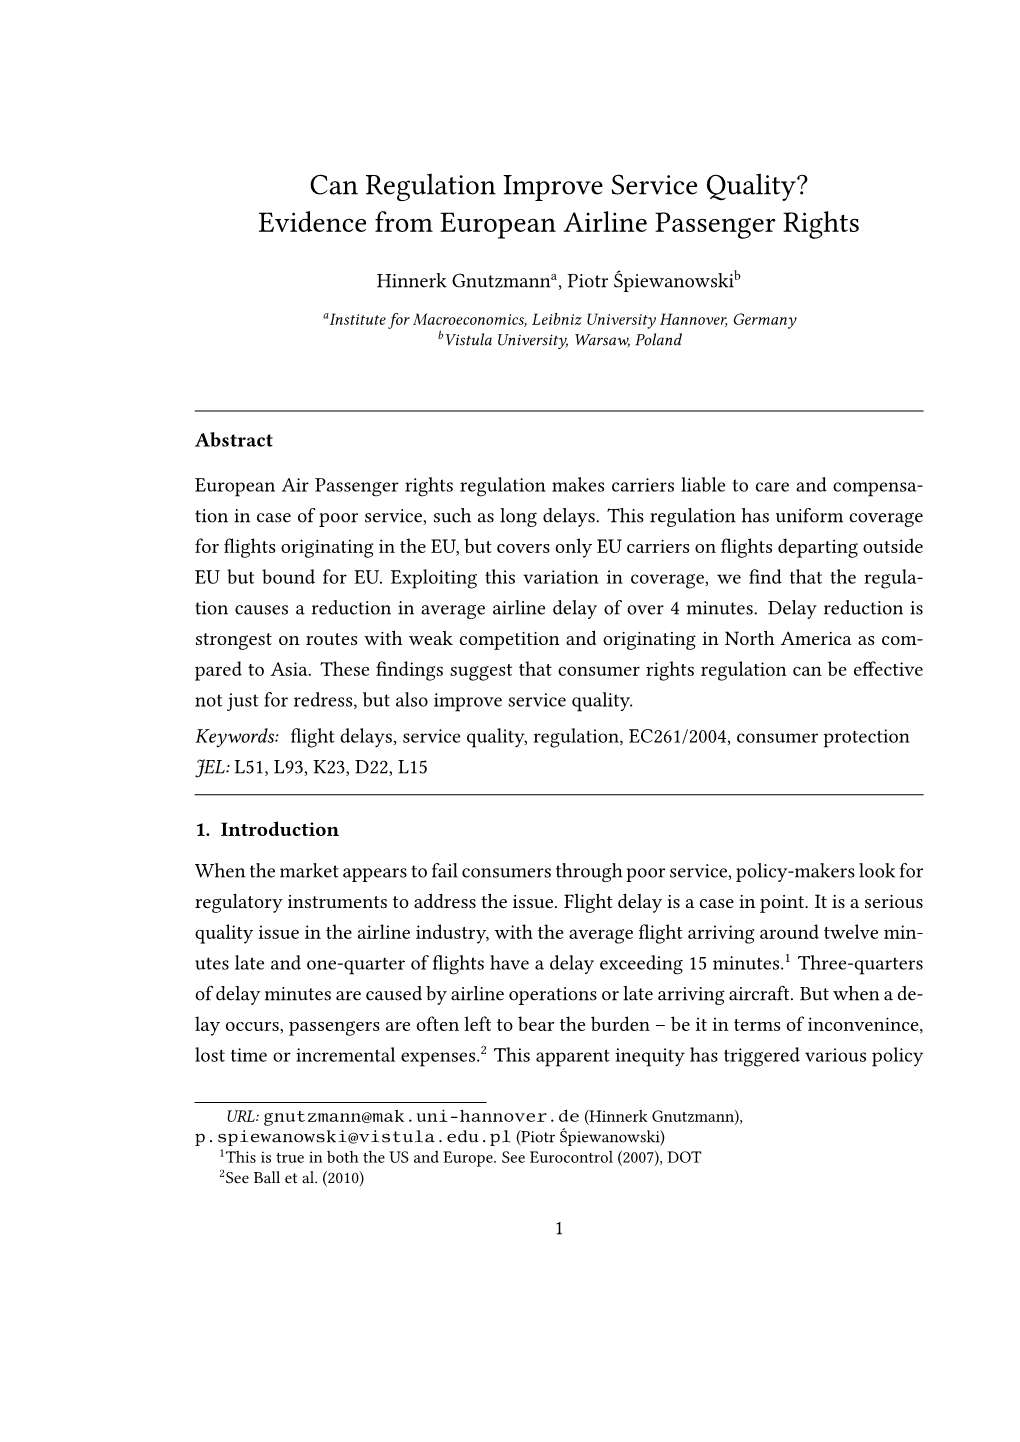 Can Regulation Improve Service Quality? Evidence from European Airline Passenger Rights